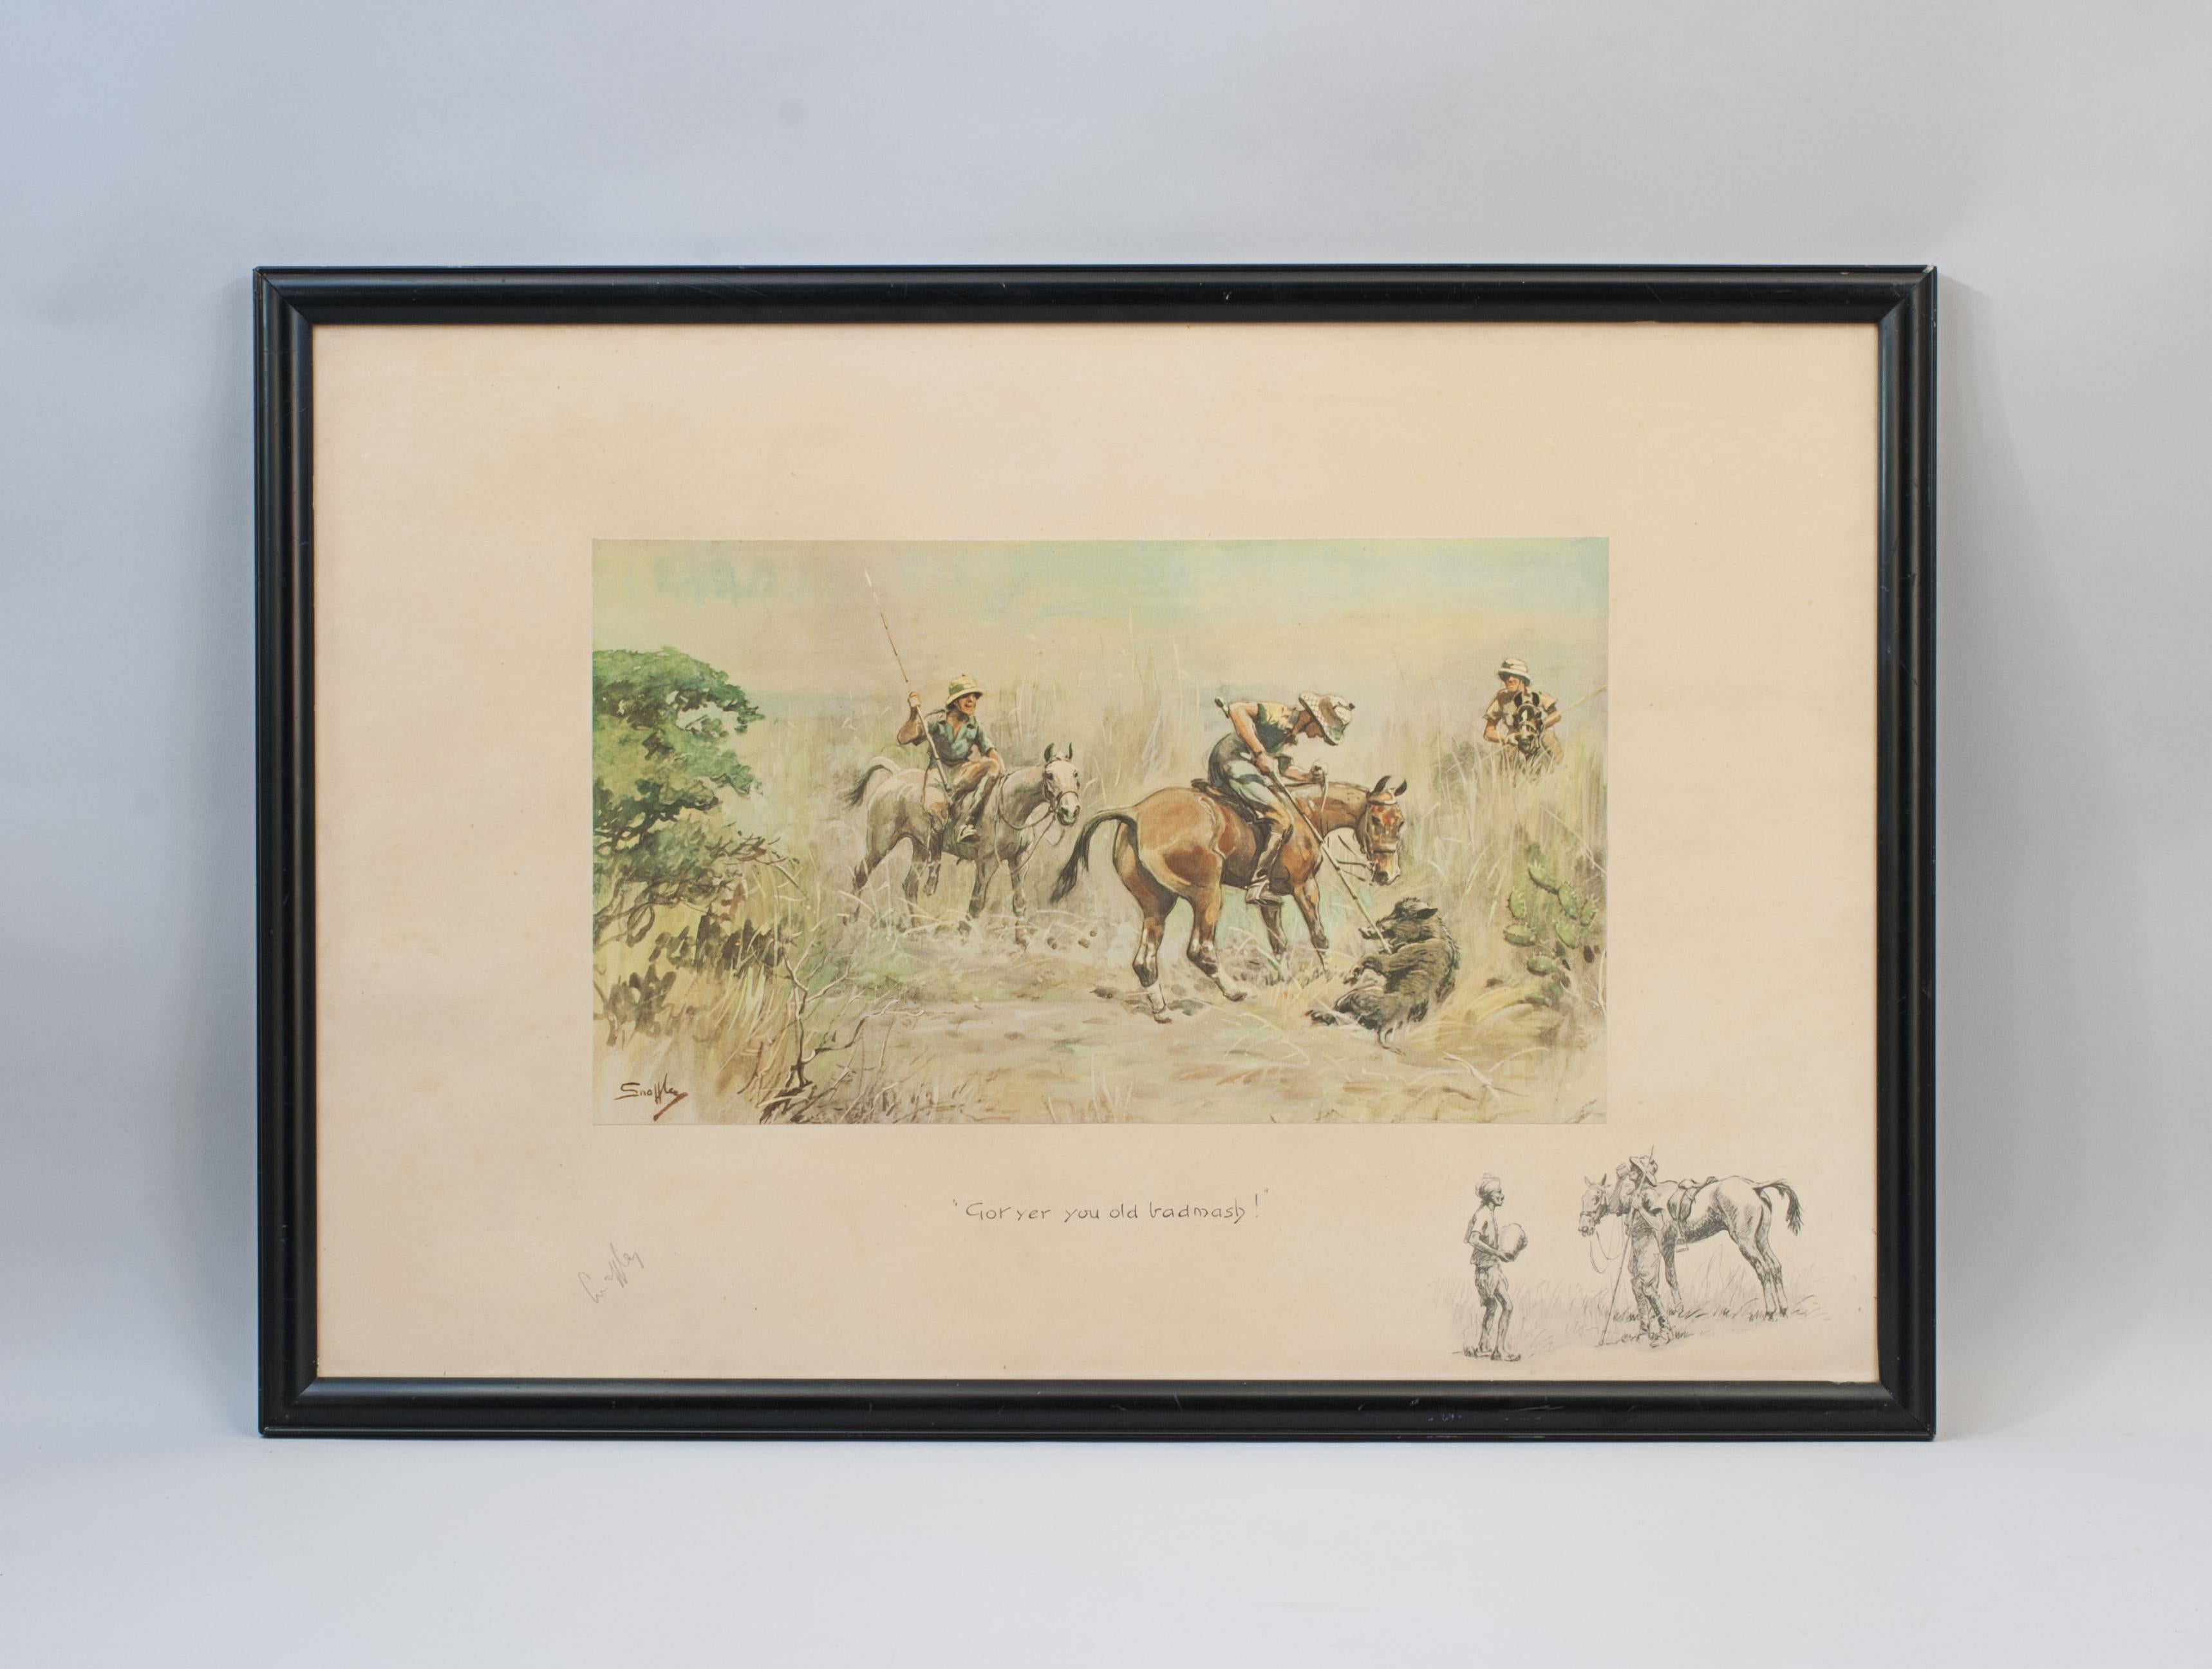 Got Yer You Old Badmash! By Snaffles, Pig Sticking.
A fine signed Snaffles Pigsticking lithograph titled 'Got Yer You Old Badmash!'. This picture depicts a rider spearing a pig from horse back. Another rider is dismounting to help whilst another can